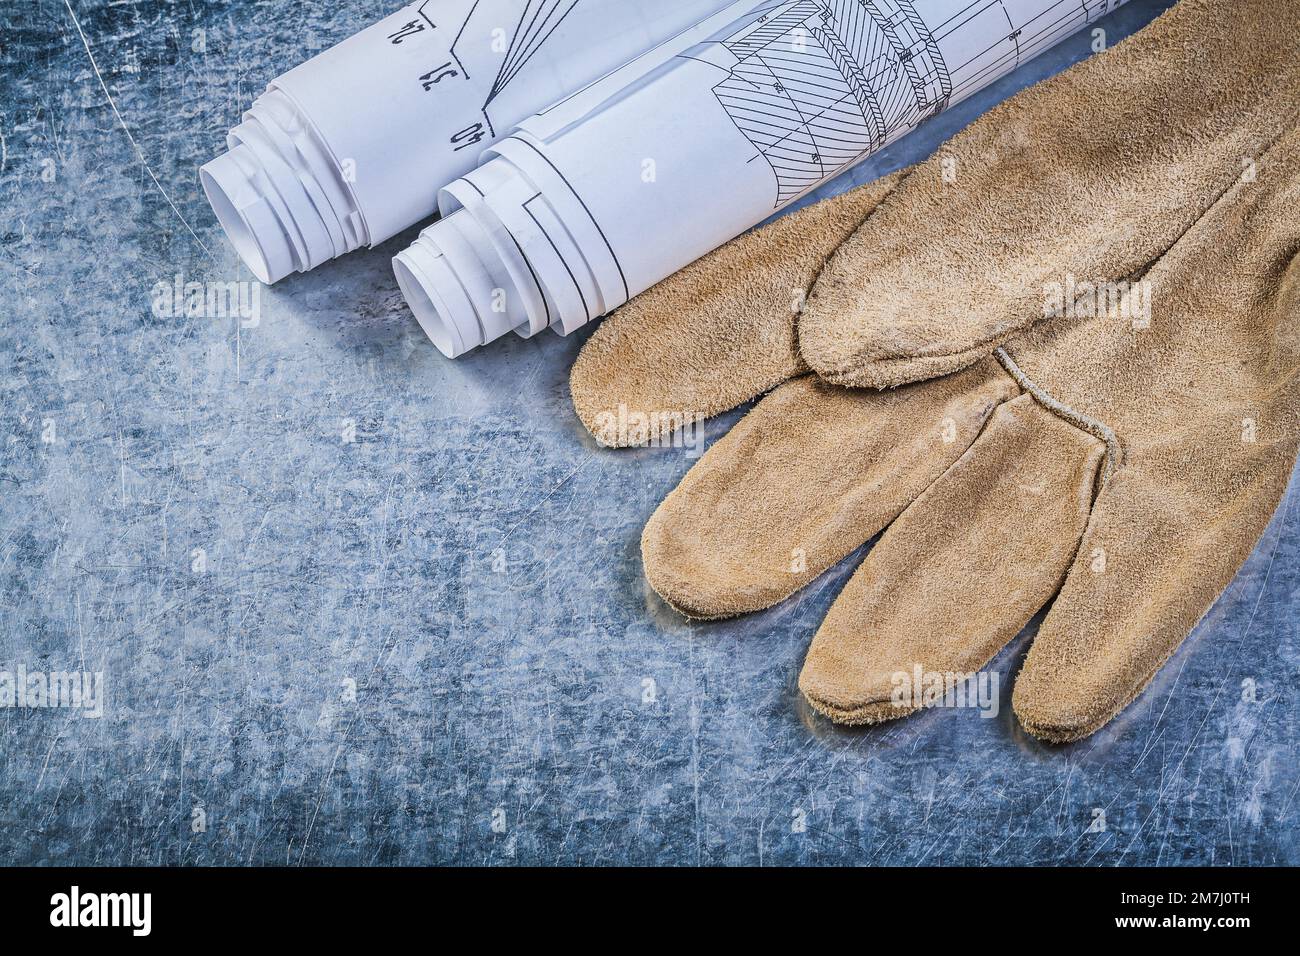 Rolled engineering drawings leather safety gloves on metallic background construction concept. Stock Photo